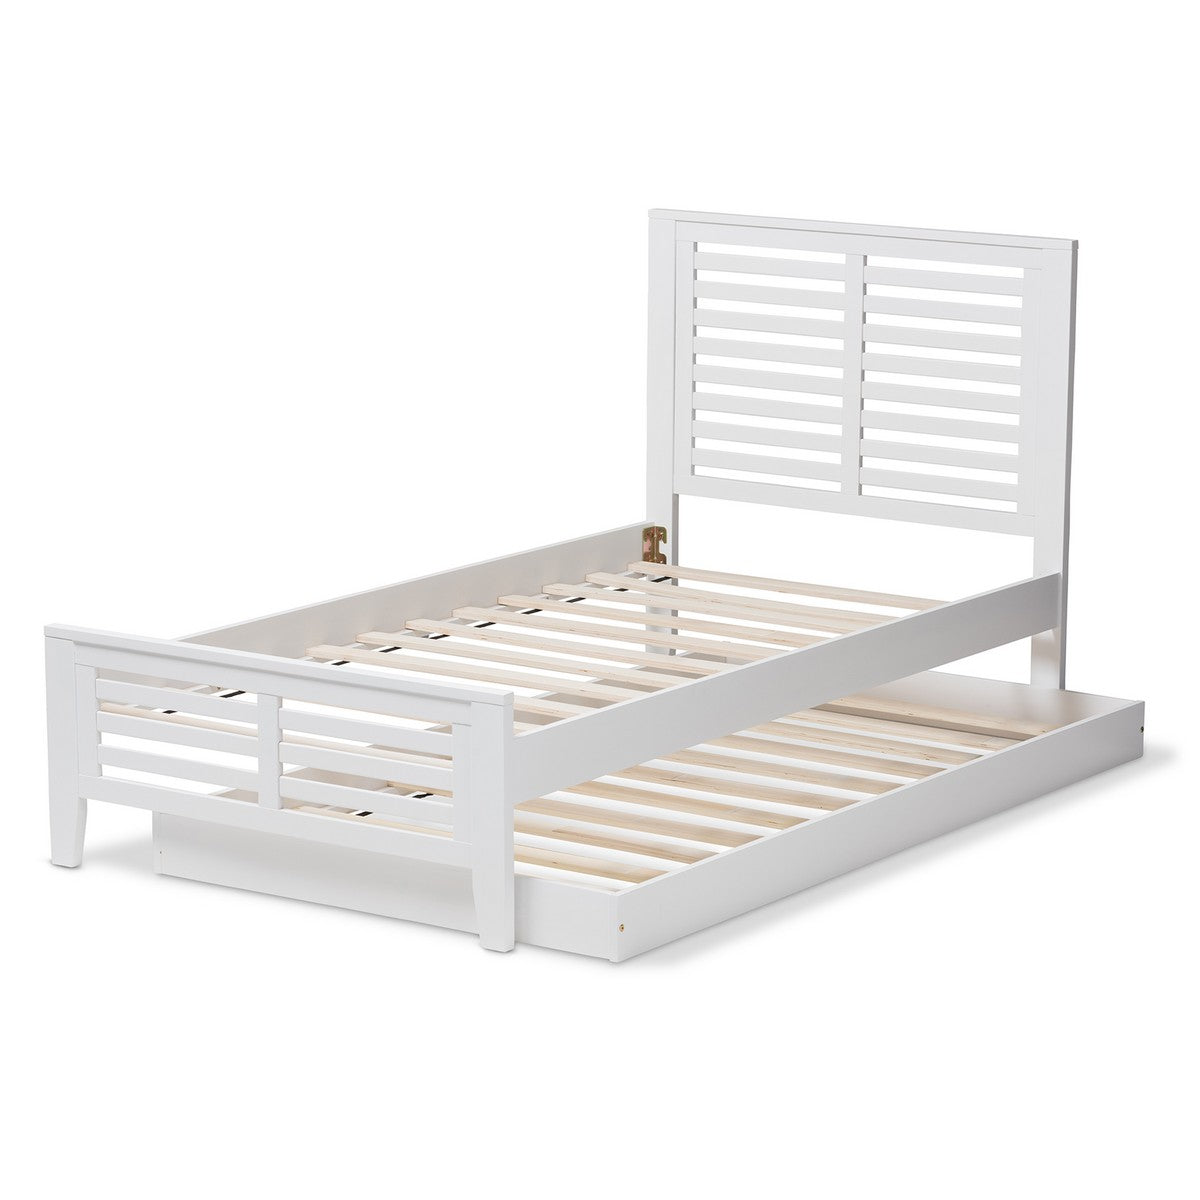 Baxton Studio Sedona Modern Classic Mission Style White-Finished Wood Twin Platform Bed with Trundle